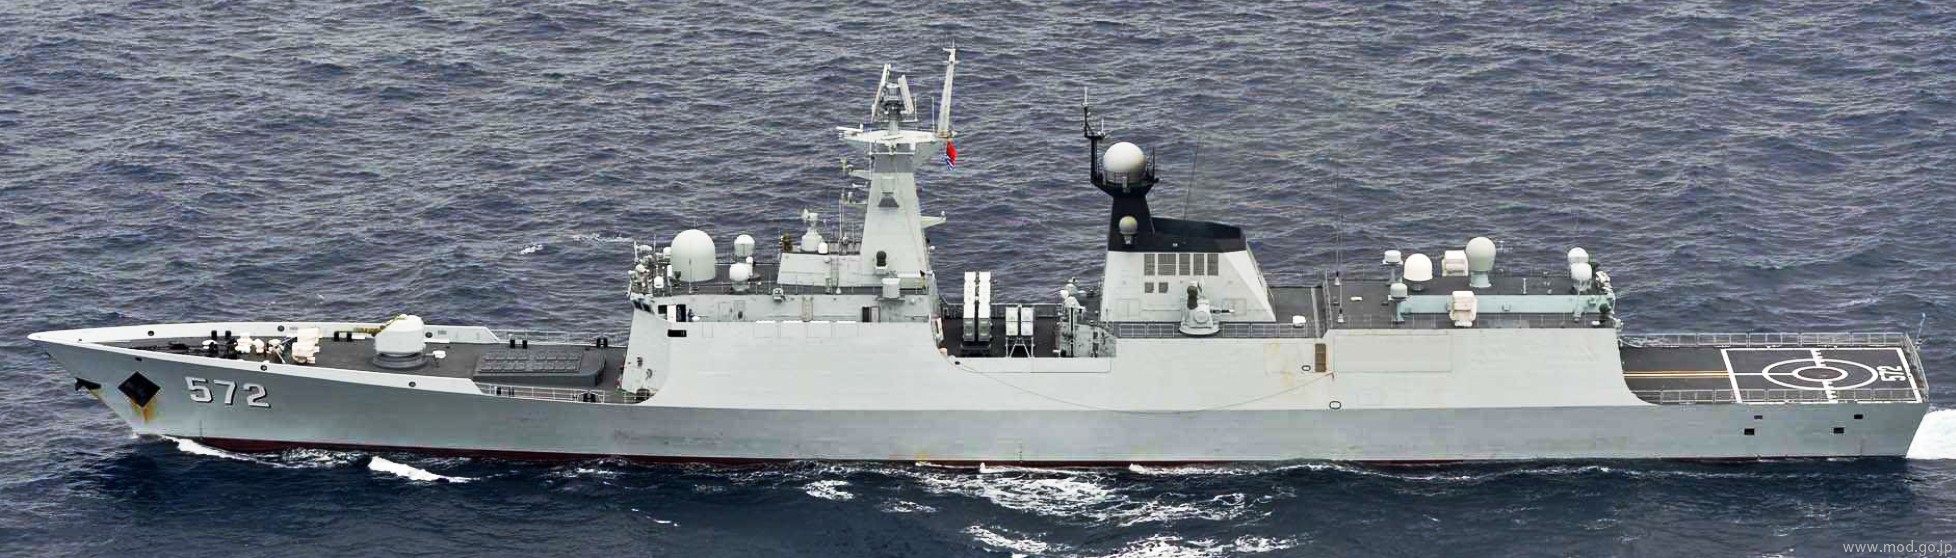 ffg-572 plans hengshui type 054a jiangkai ii class guided missile frigate china people's liberation army navy 03